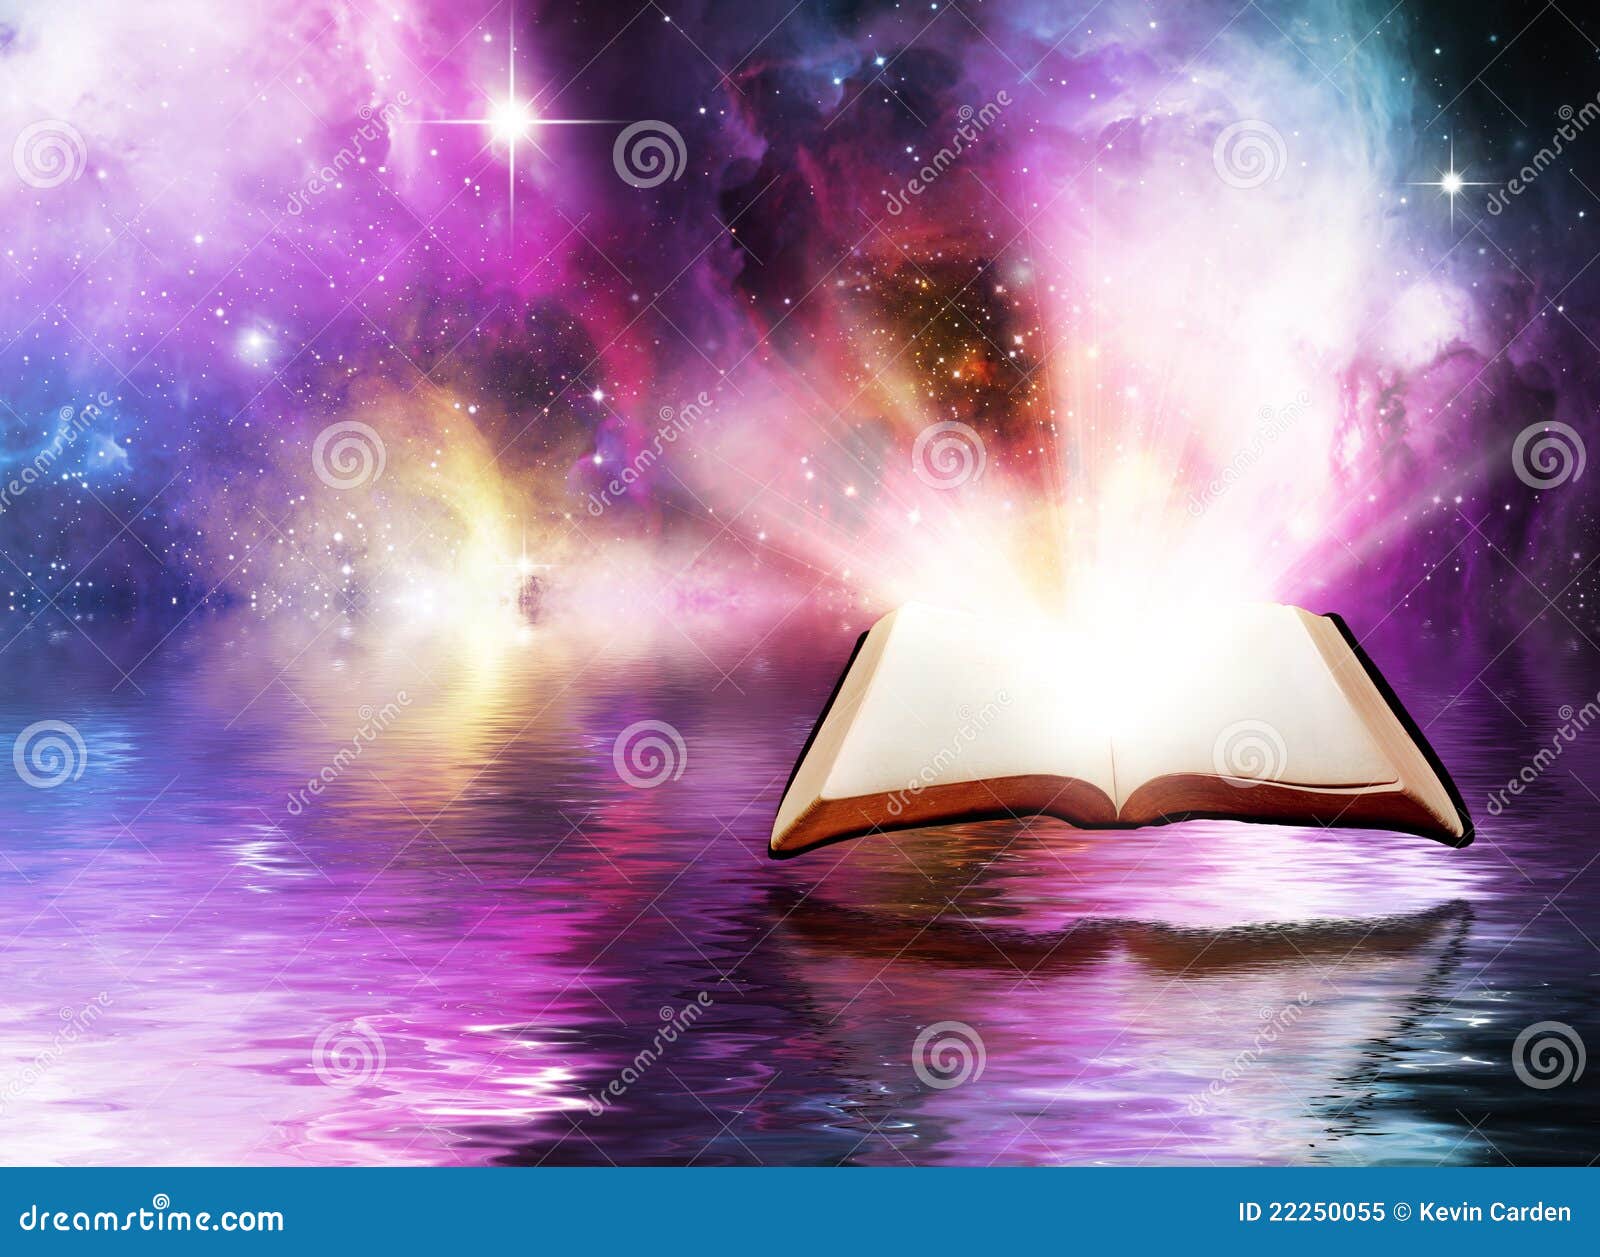 Open Bible with Space Background Stock Image - Image of christ, stand:  22250055